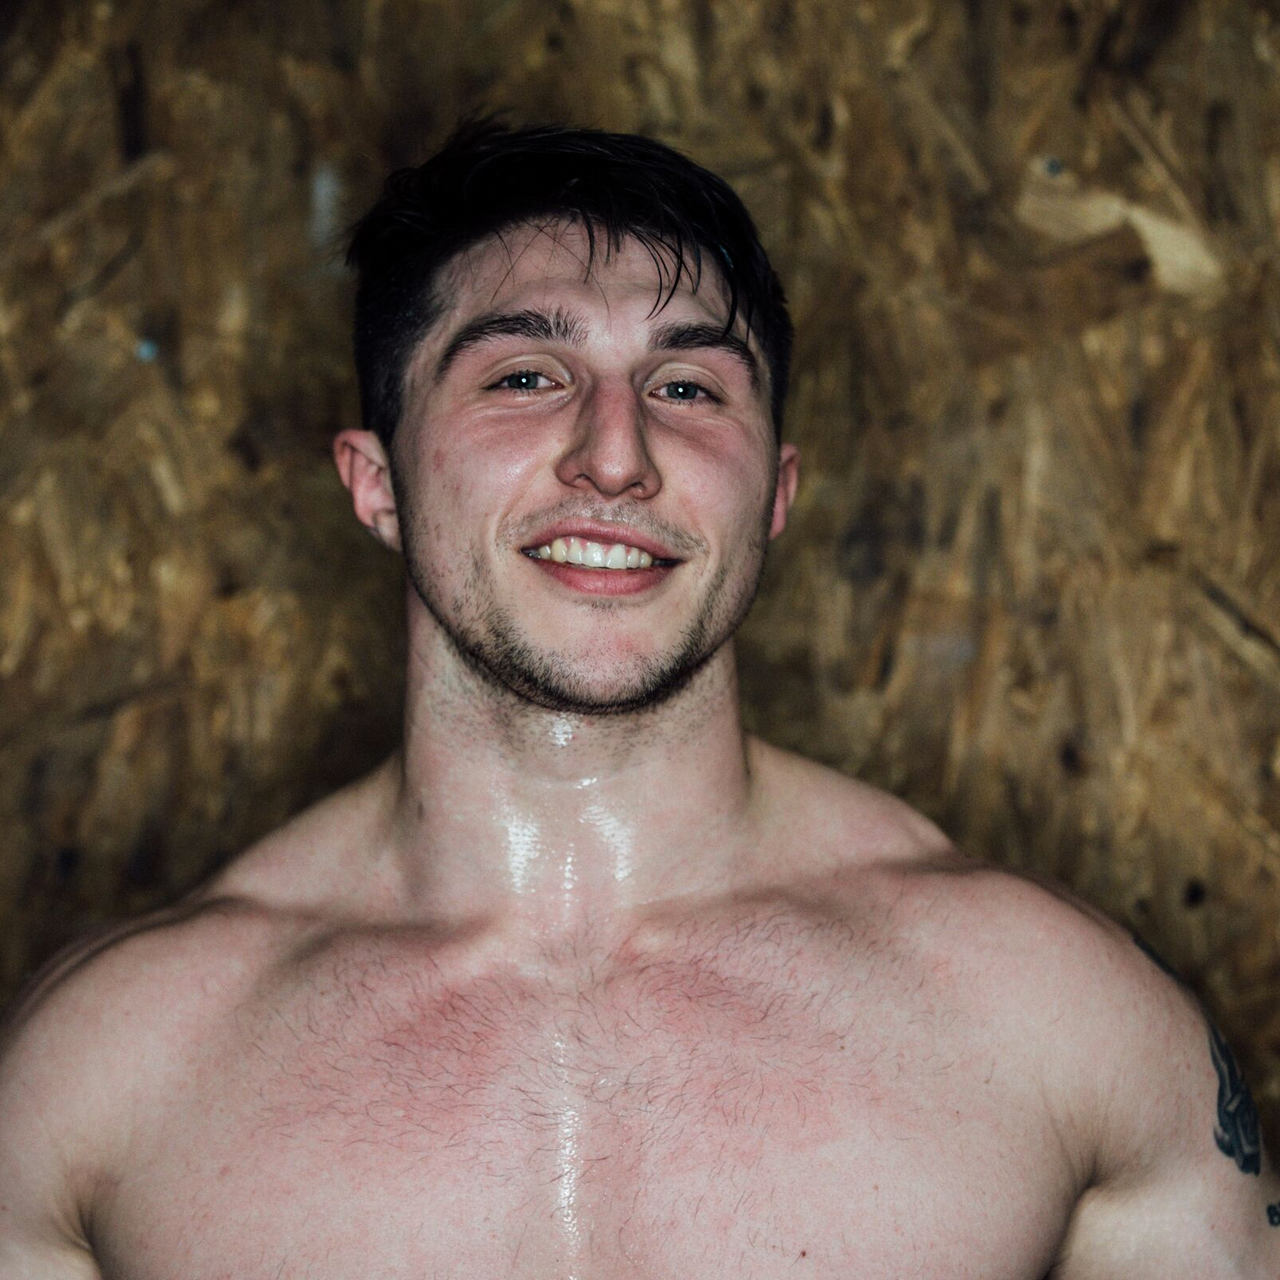 A shirtless man with a tattoo on his arm is smiling for the camera.